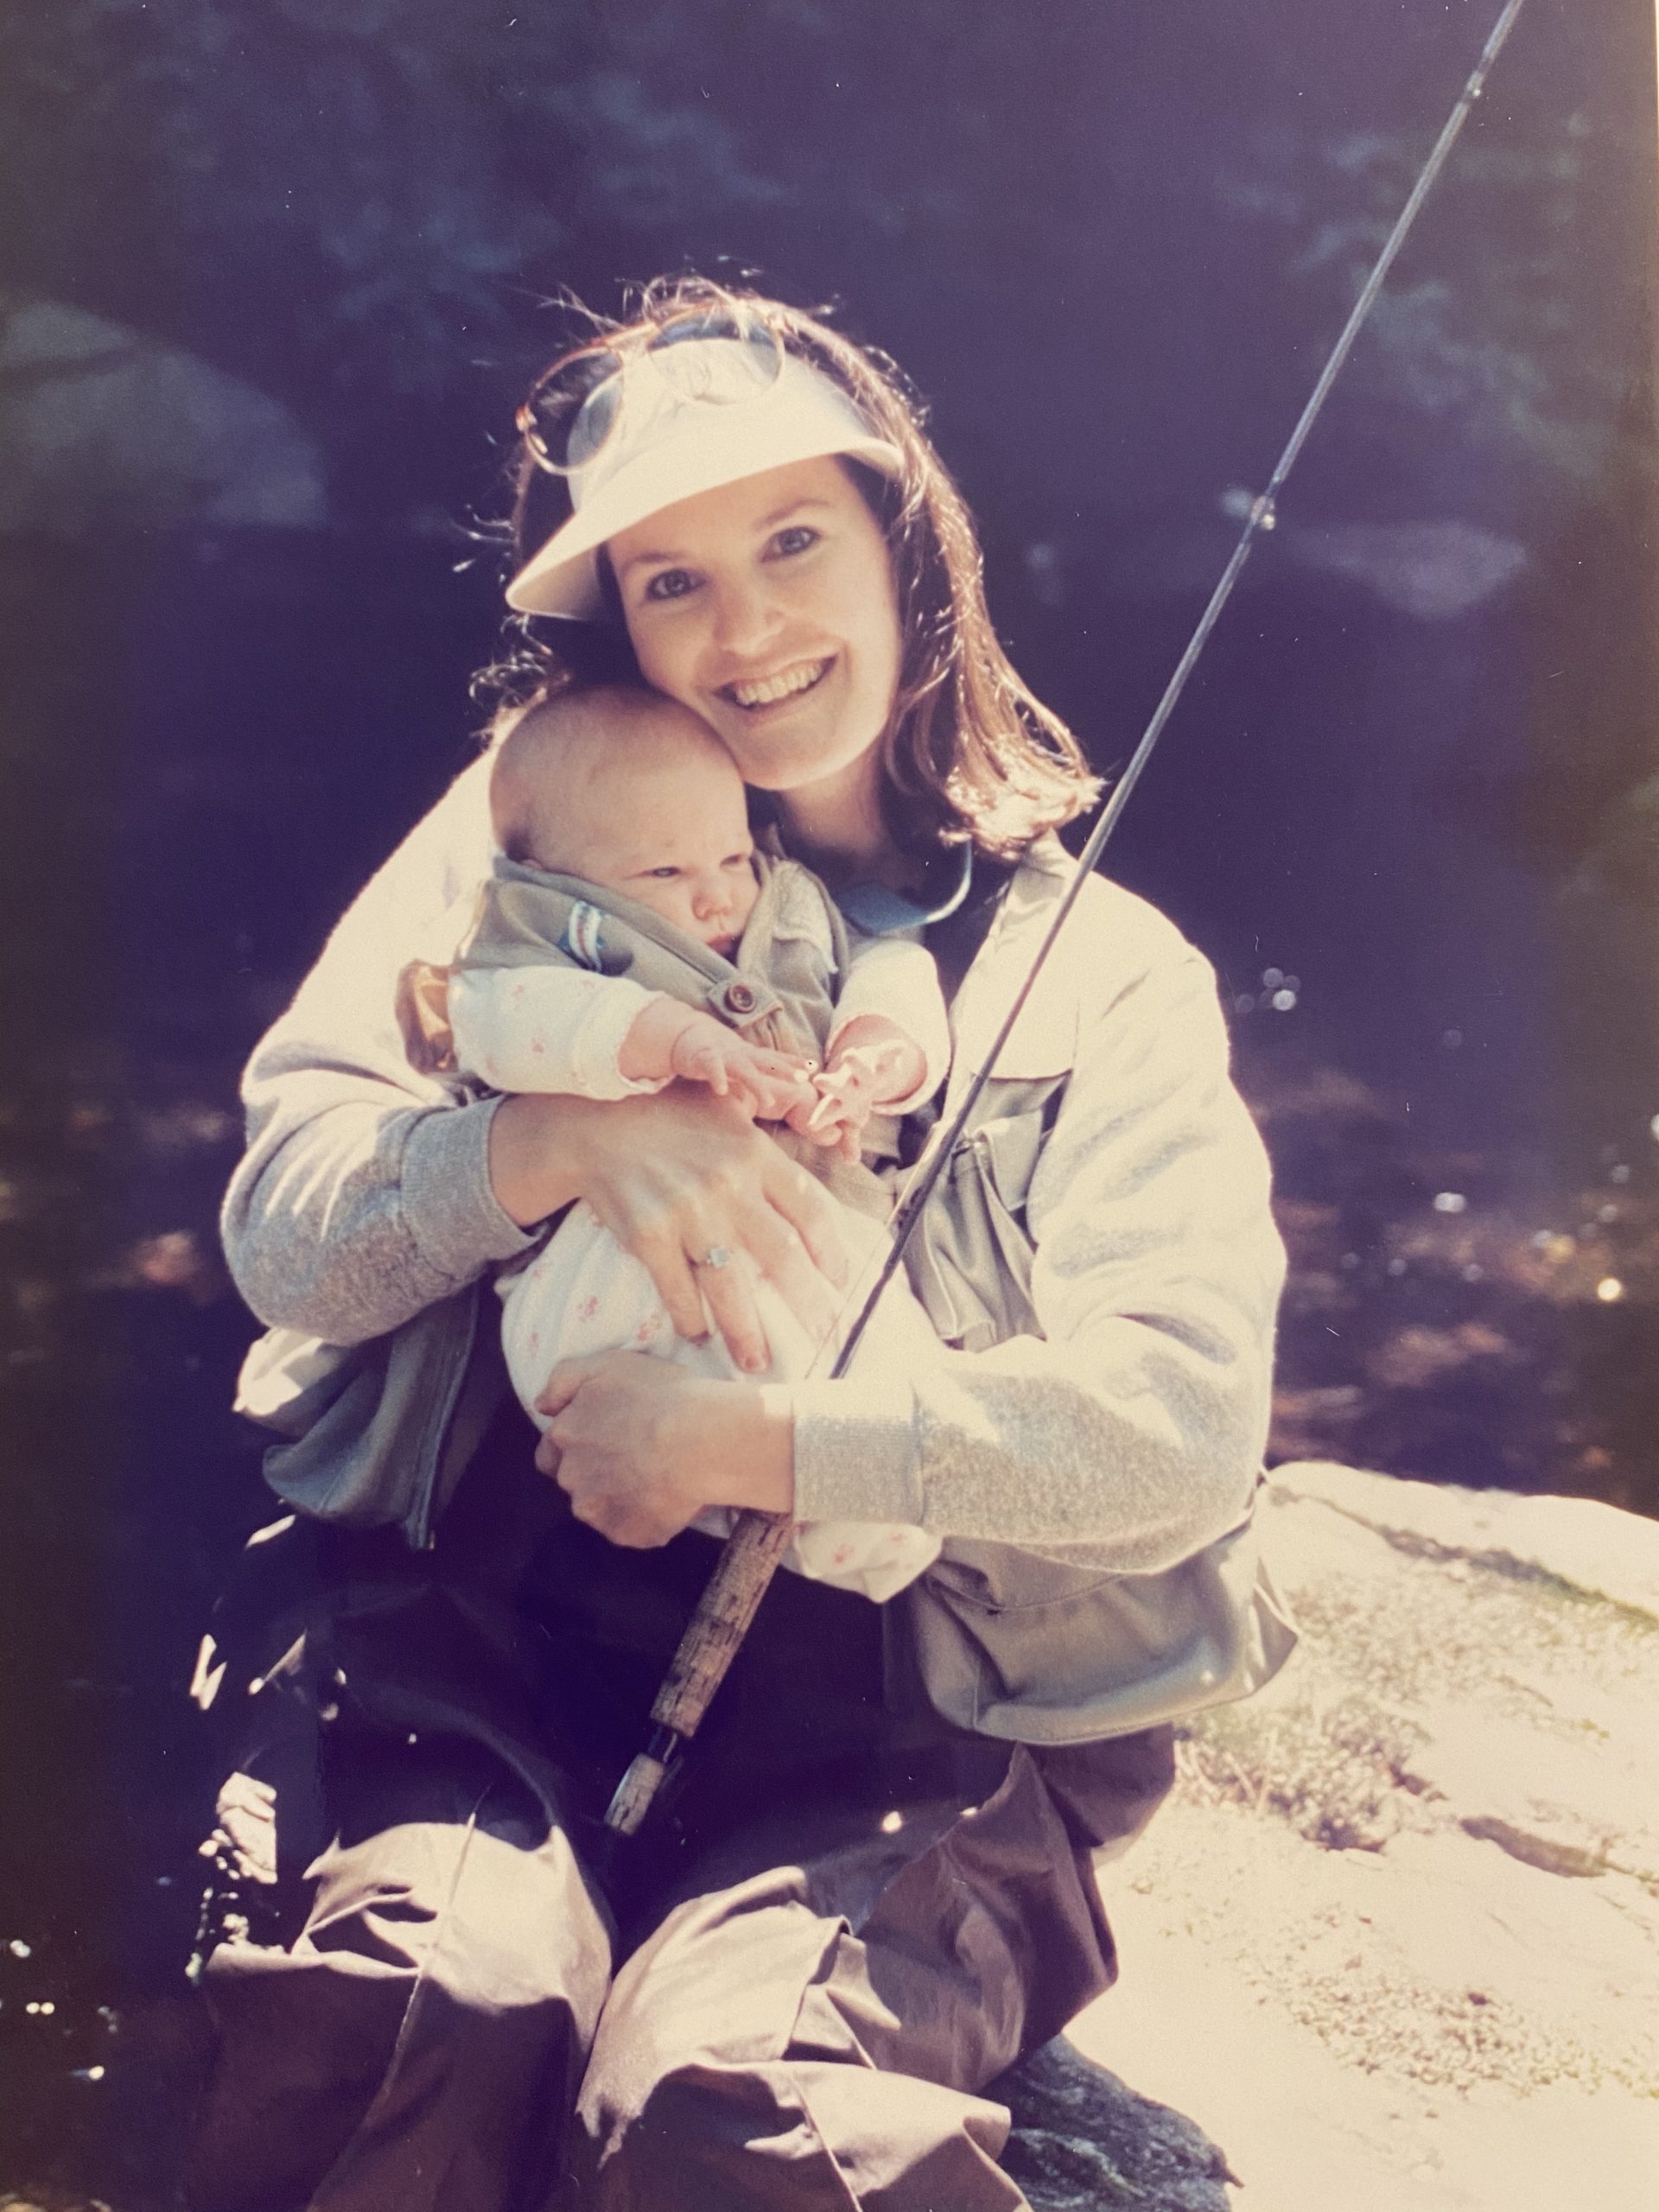 Margaret at 2 months old, fly fishing with her mom, Emily.